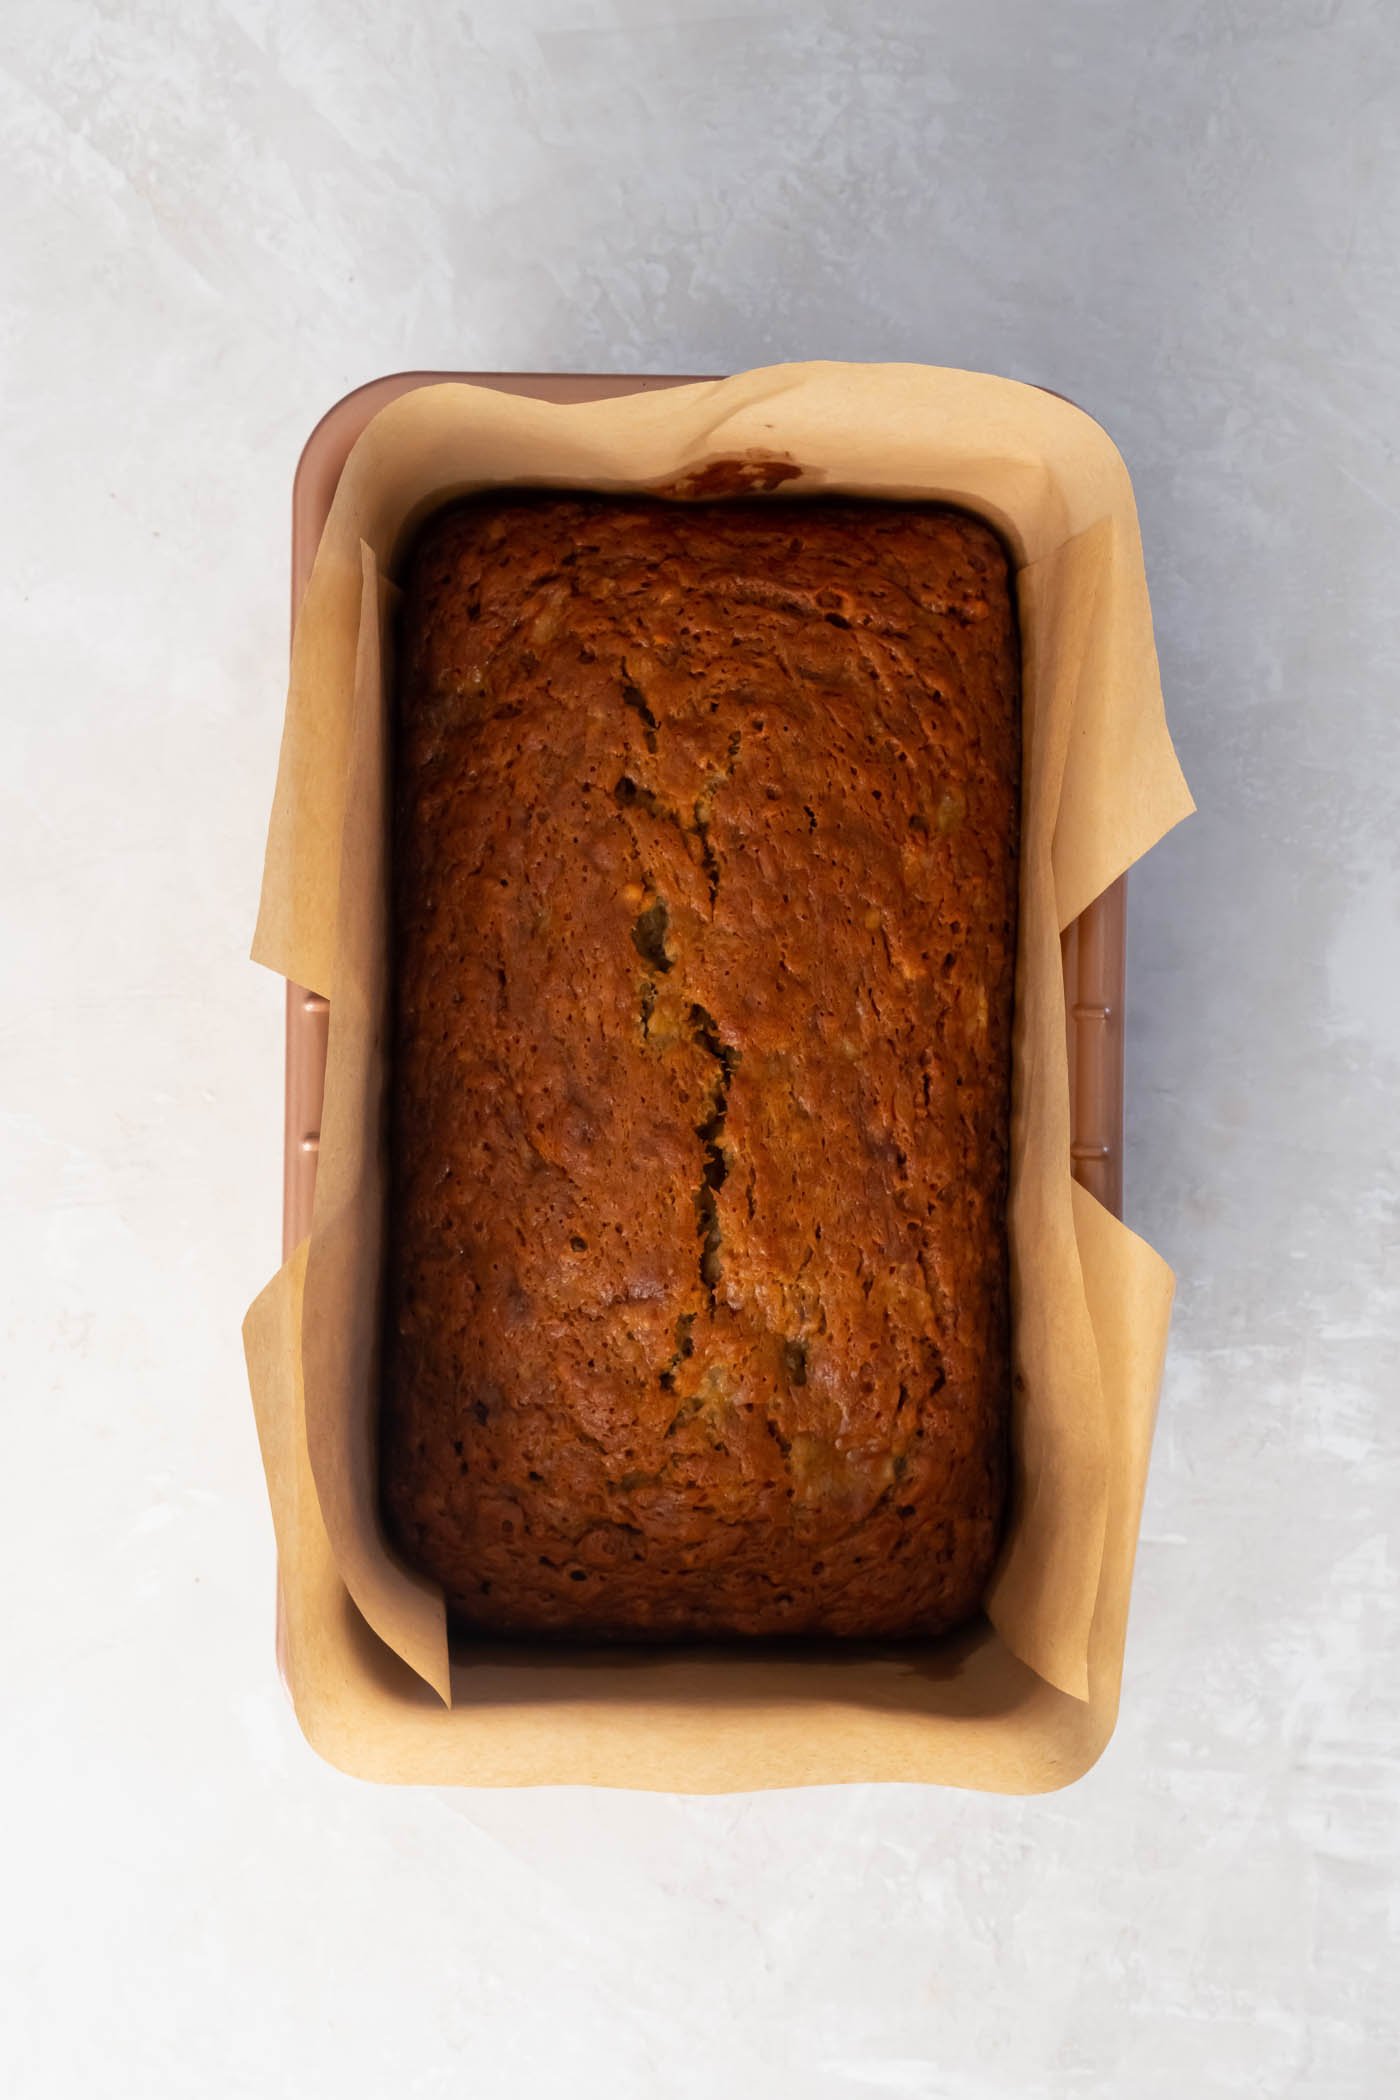 Baked loaf of banana bread in parchment paper lined metal baking pan.